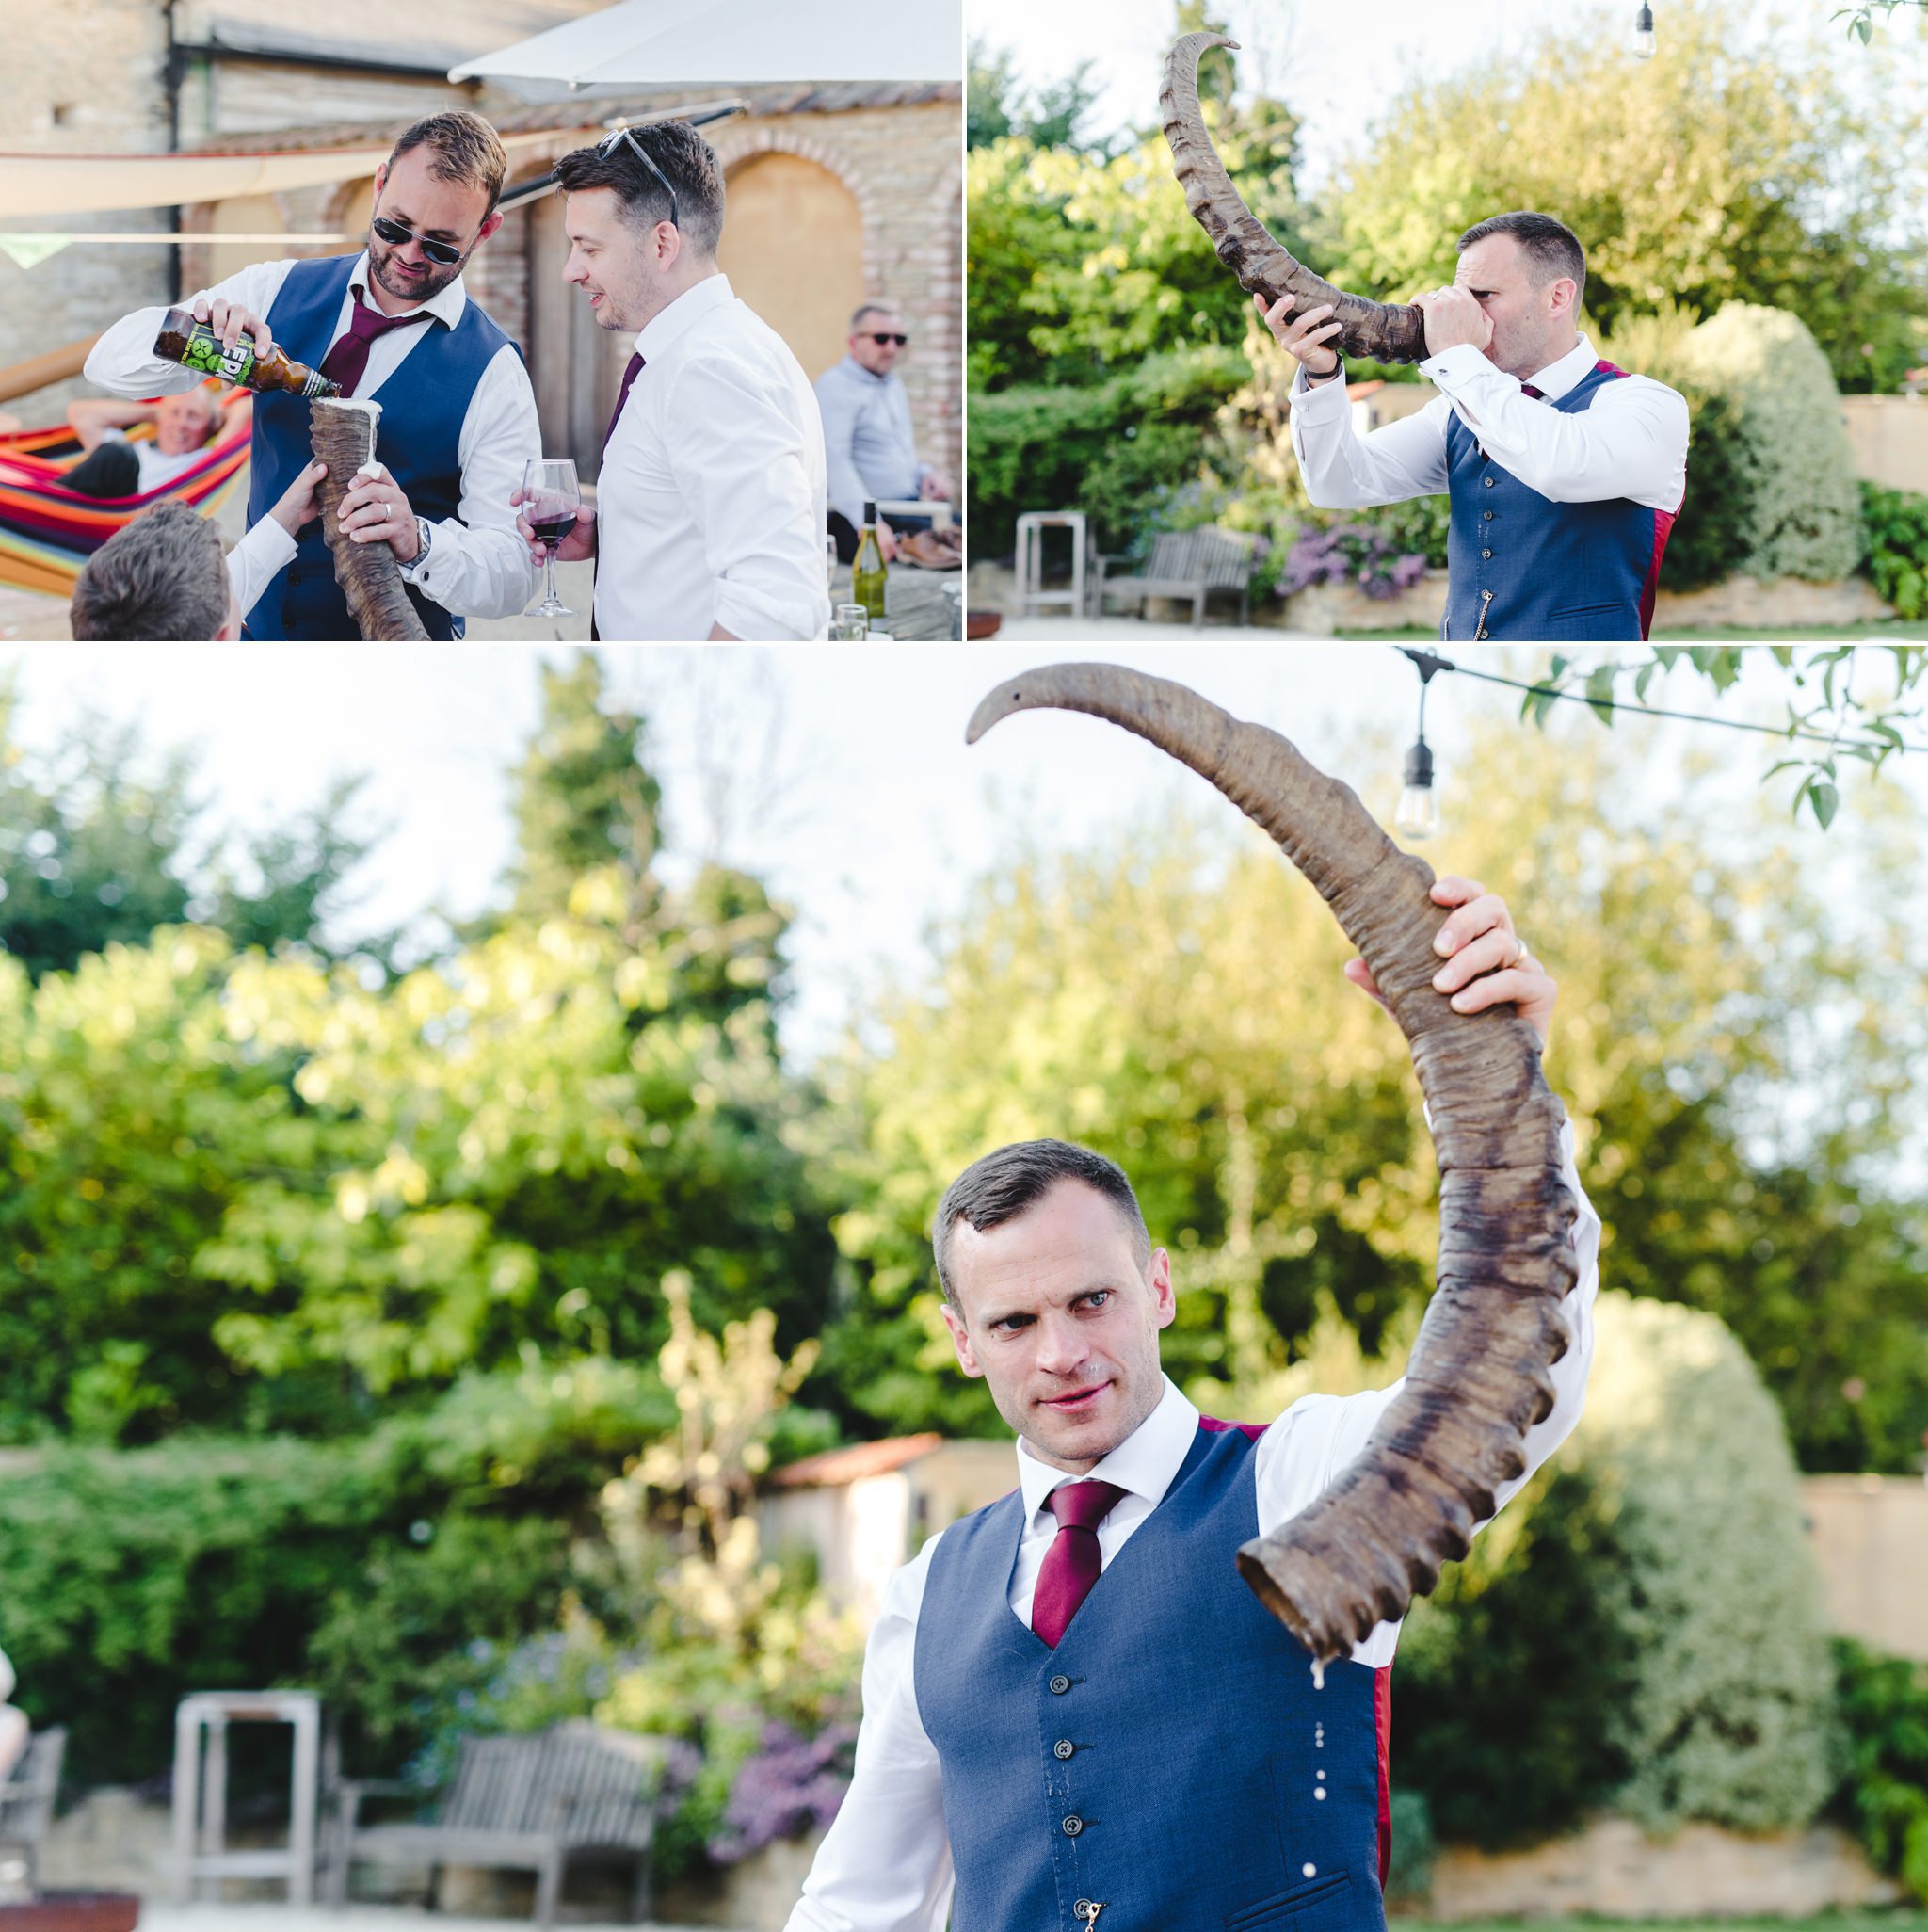 The groom at his weding drinking from a rams horn